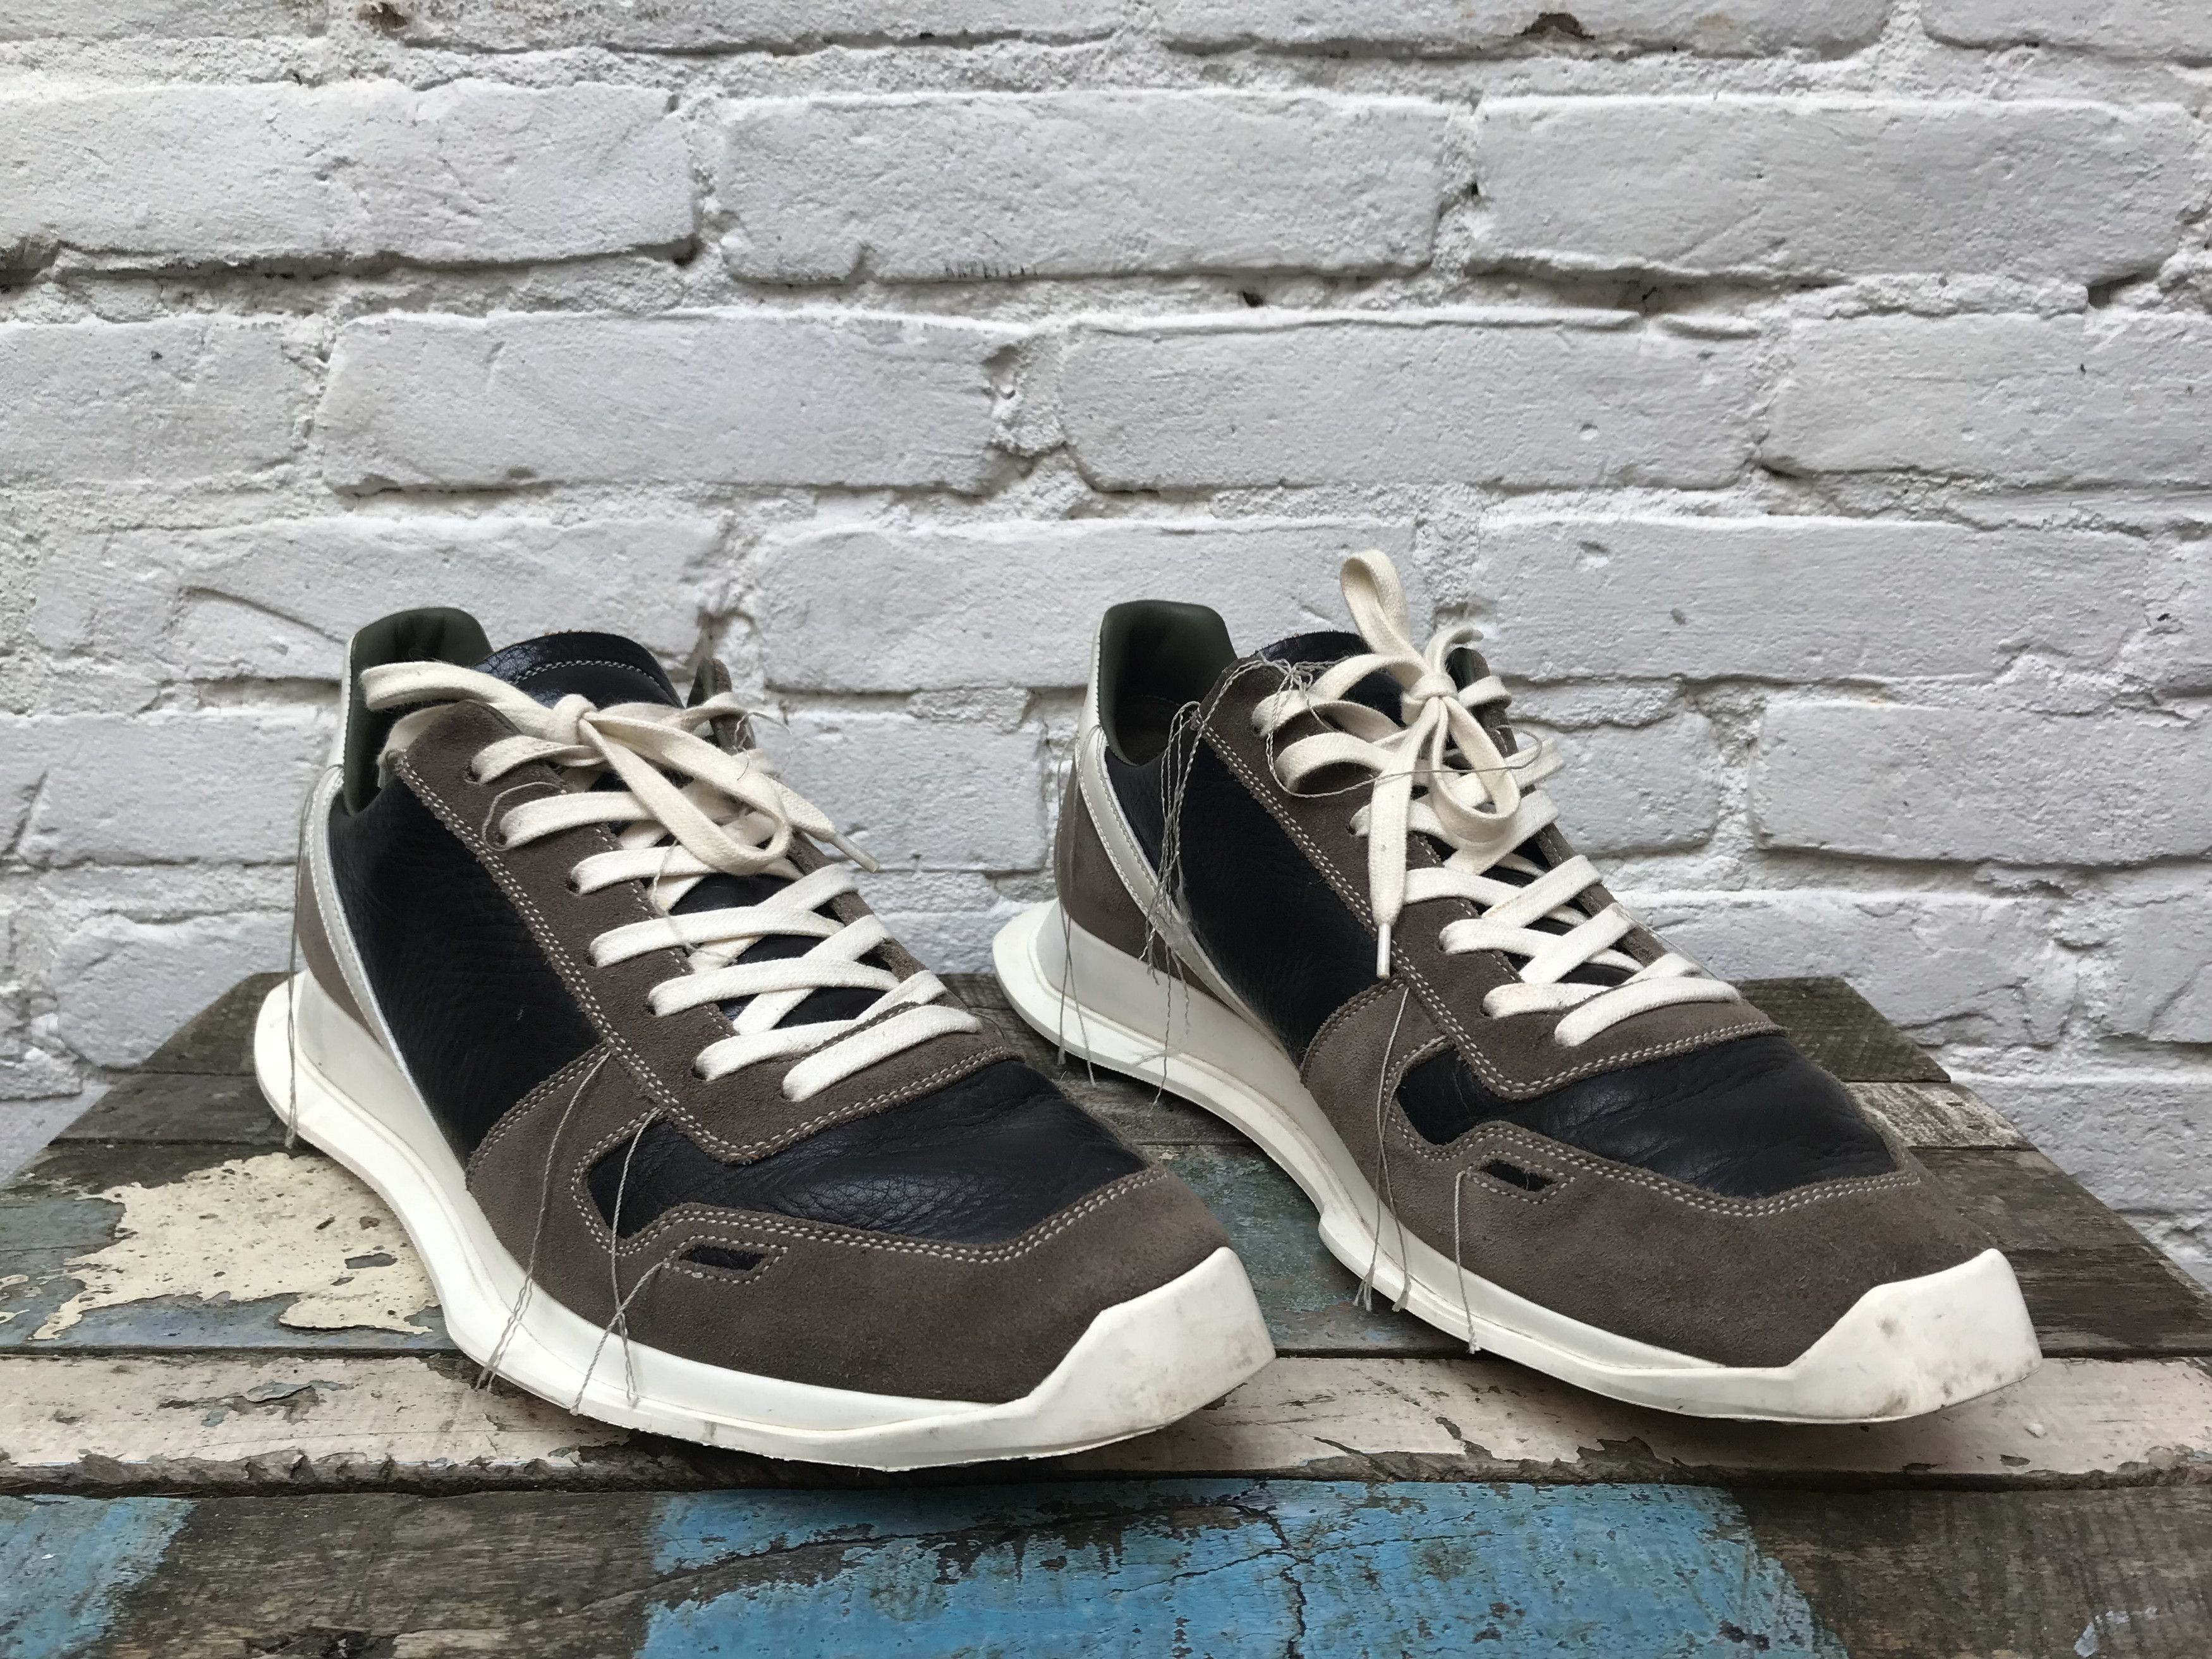 Rick Owens Rick Owens Runway Collection SS19 Babel Runners | Grailed